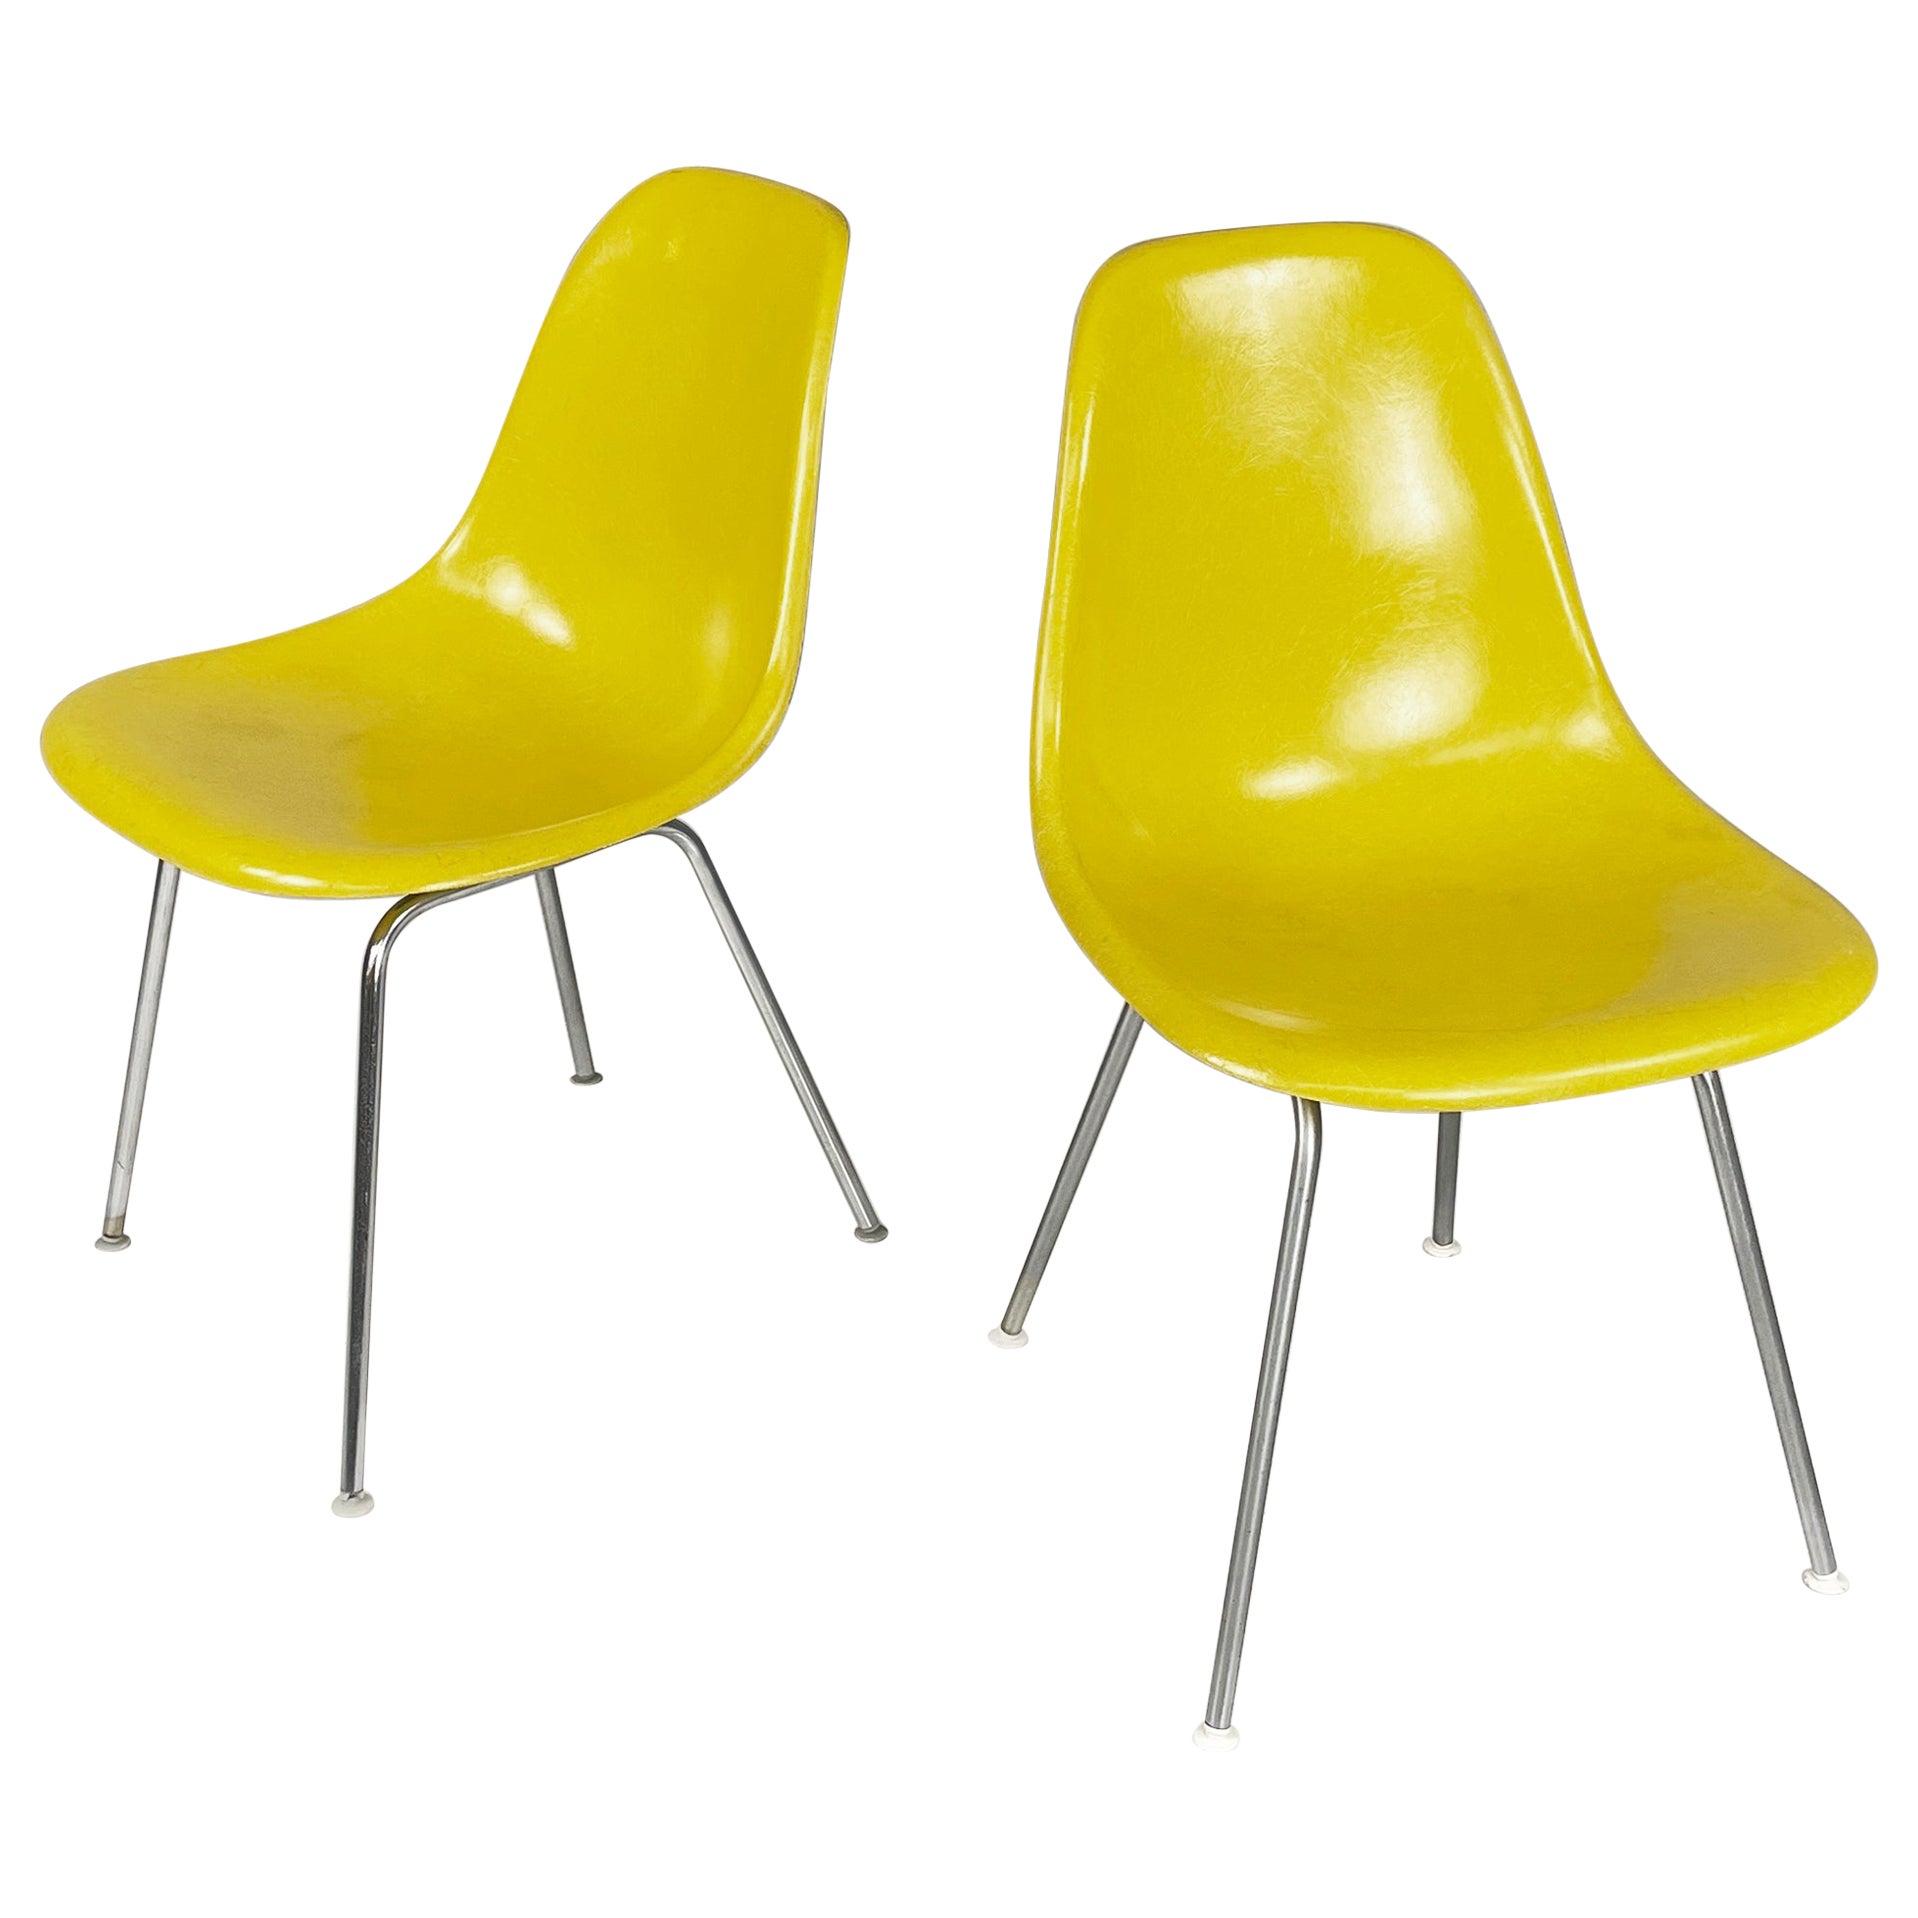 American Yellow Shell Chairs by Charles and Ray Eames for Herman Miller, 1970s For Sale